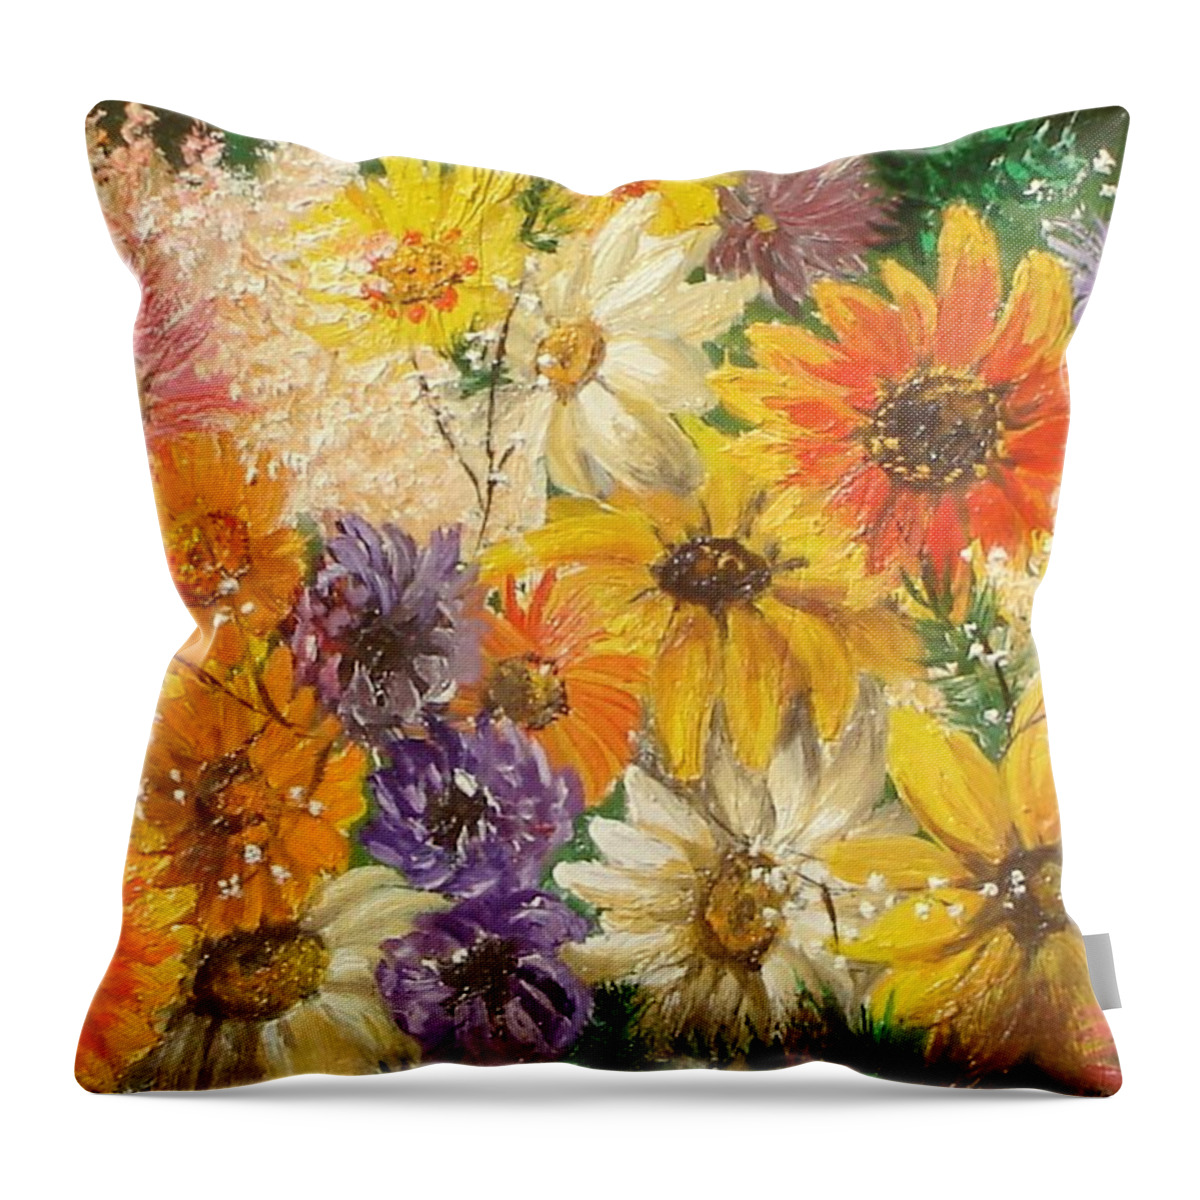 Flowers Throw Pillow featuring the painting The Bouquet by Sorin Apostolescu